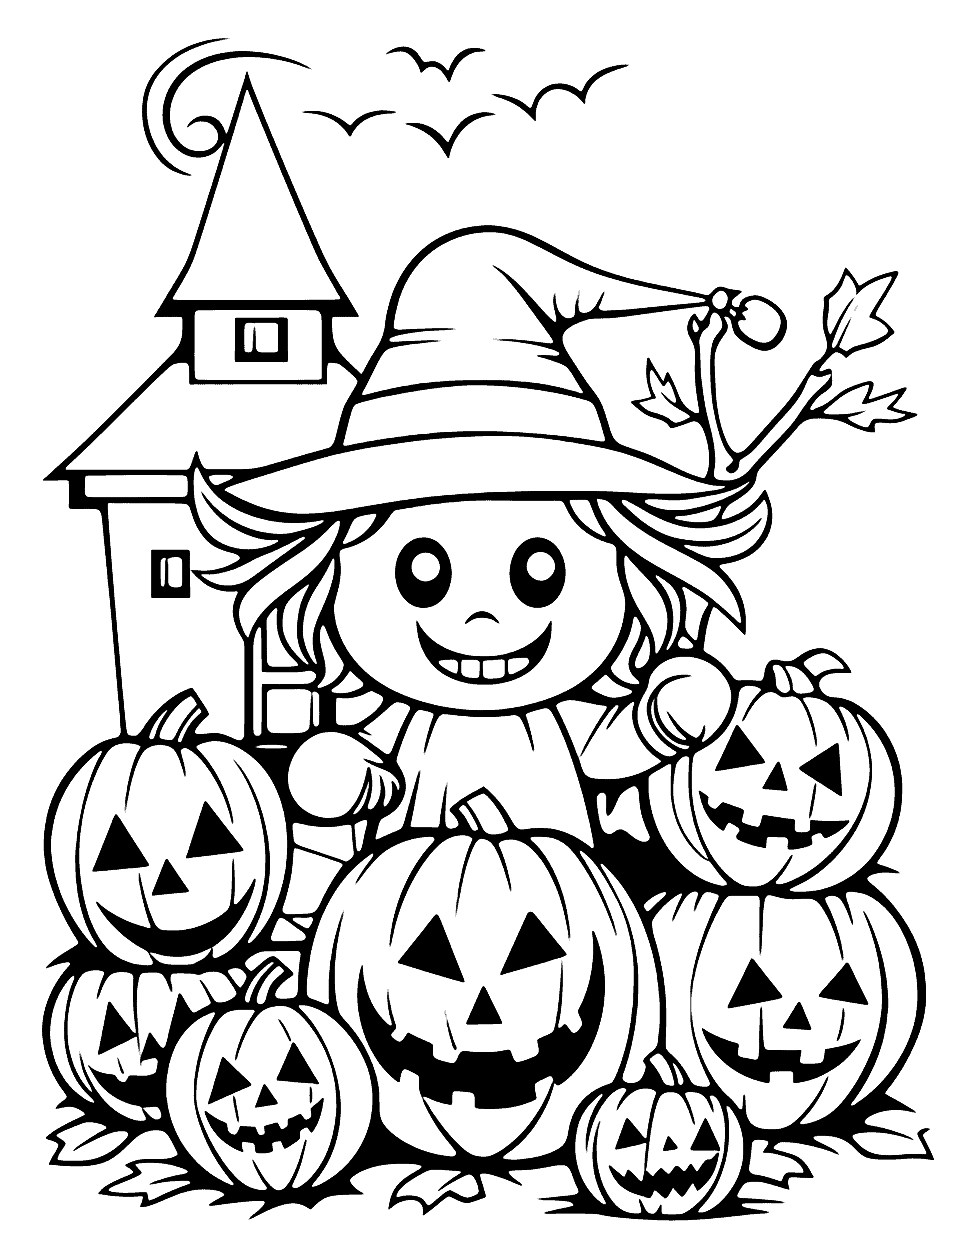 Preschool Halloween Fun Coloring Page - A simple, fun Halloween scene with a kid ghost and pumpkin surrounded, ideal for preschoolers to color.